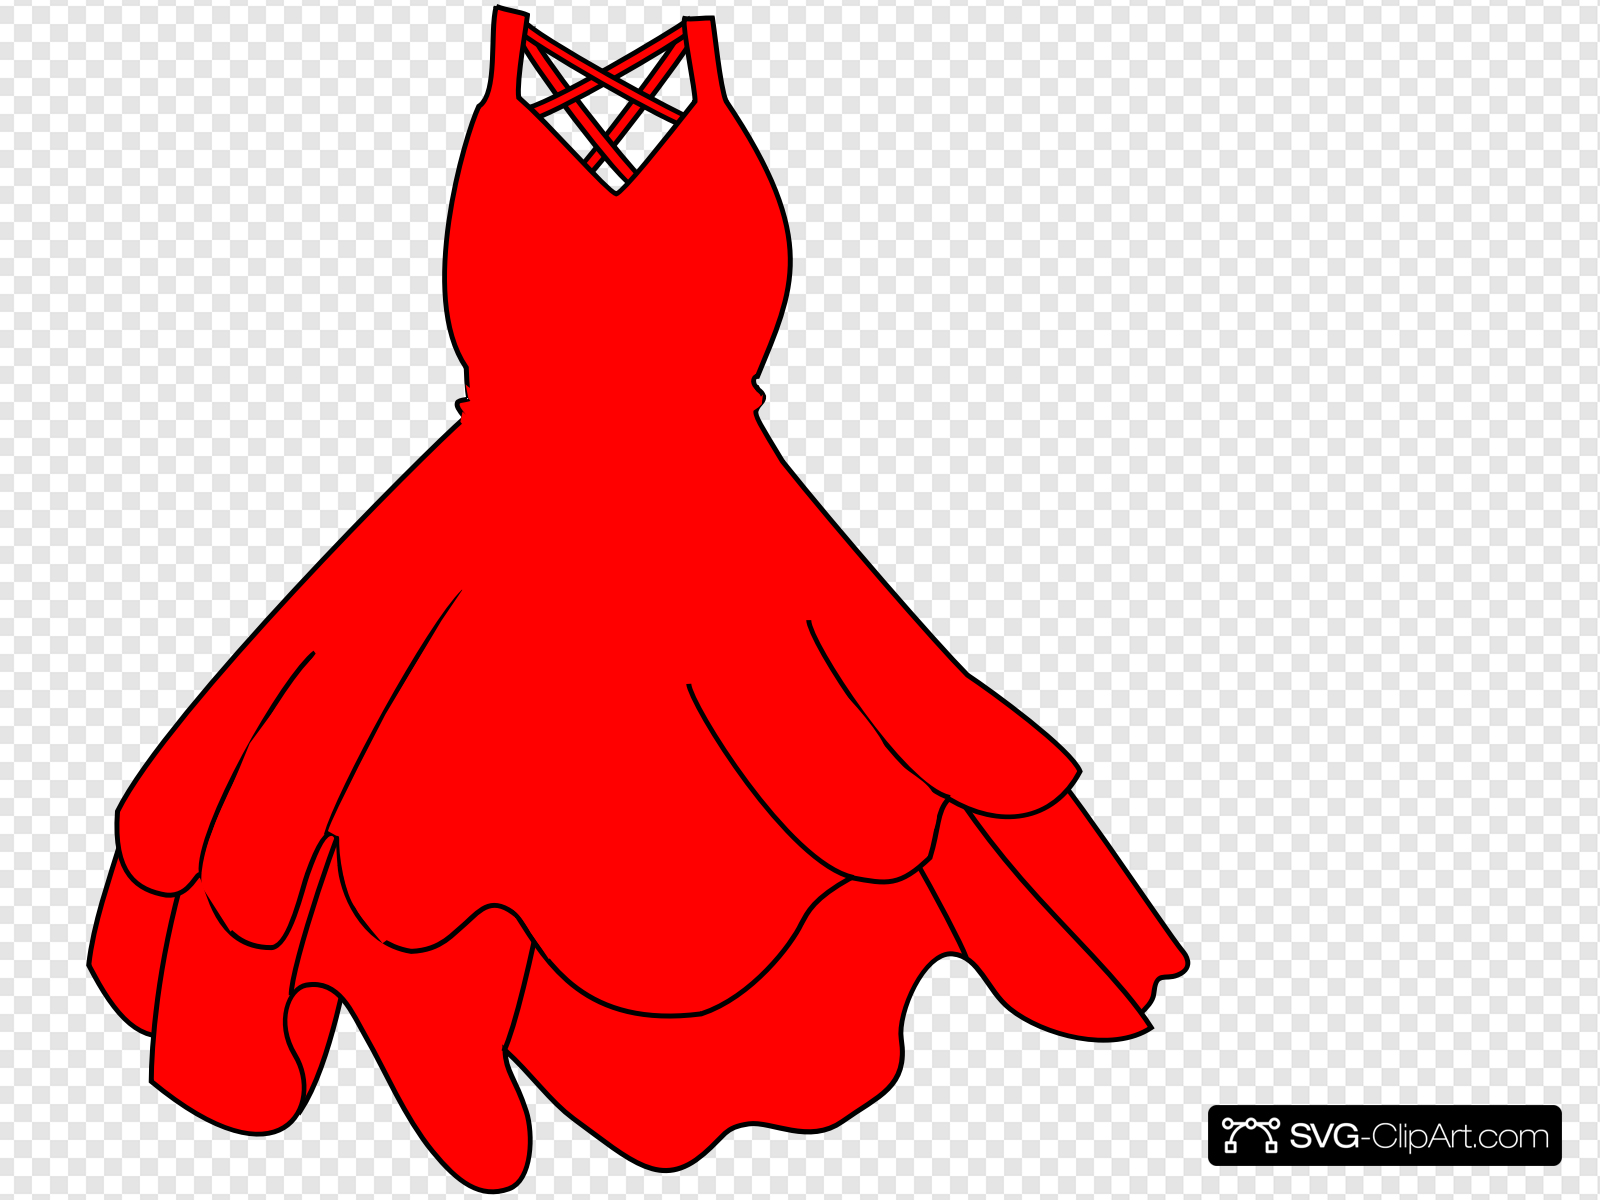 Red Dress Clip art, Icon and SVG